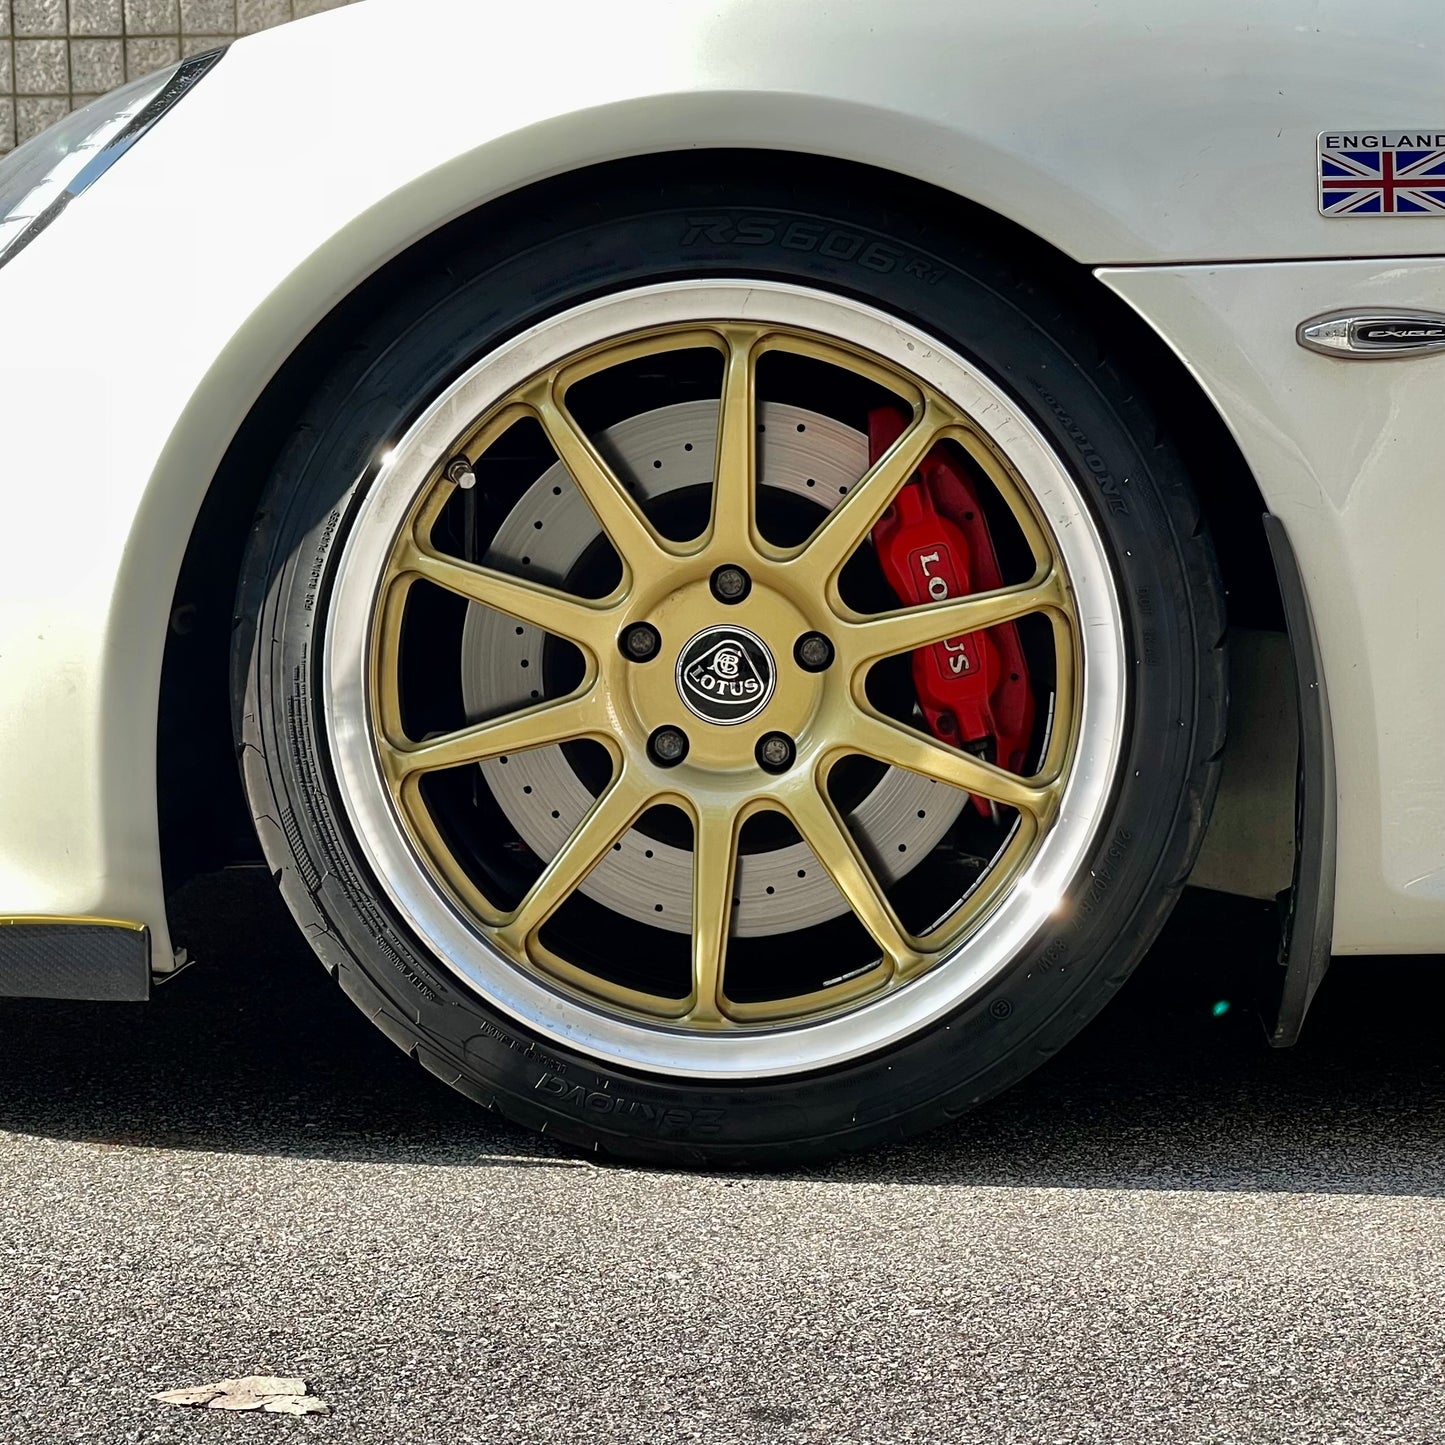 Lotus Exige V6 Forged Wheels Gold Diamond Cut Type 49 Edition